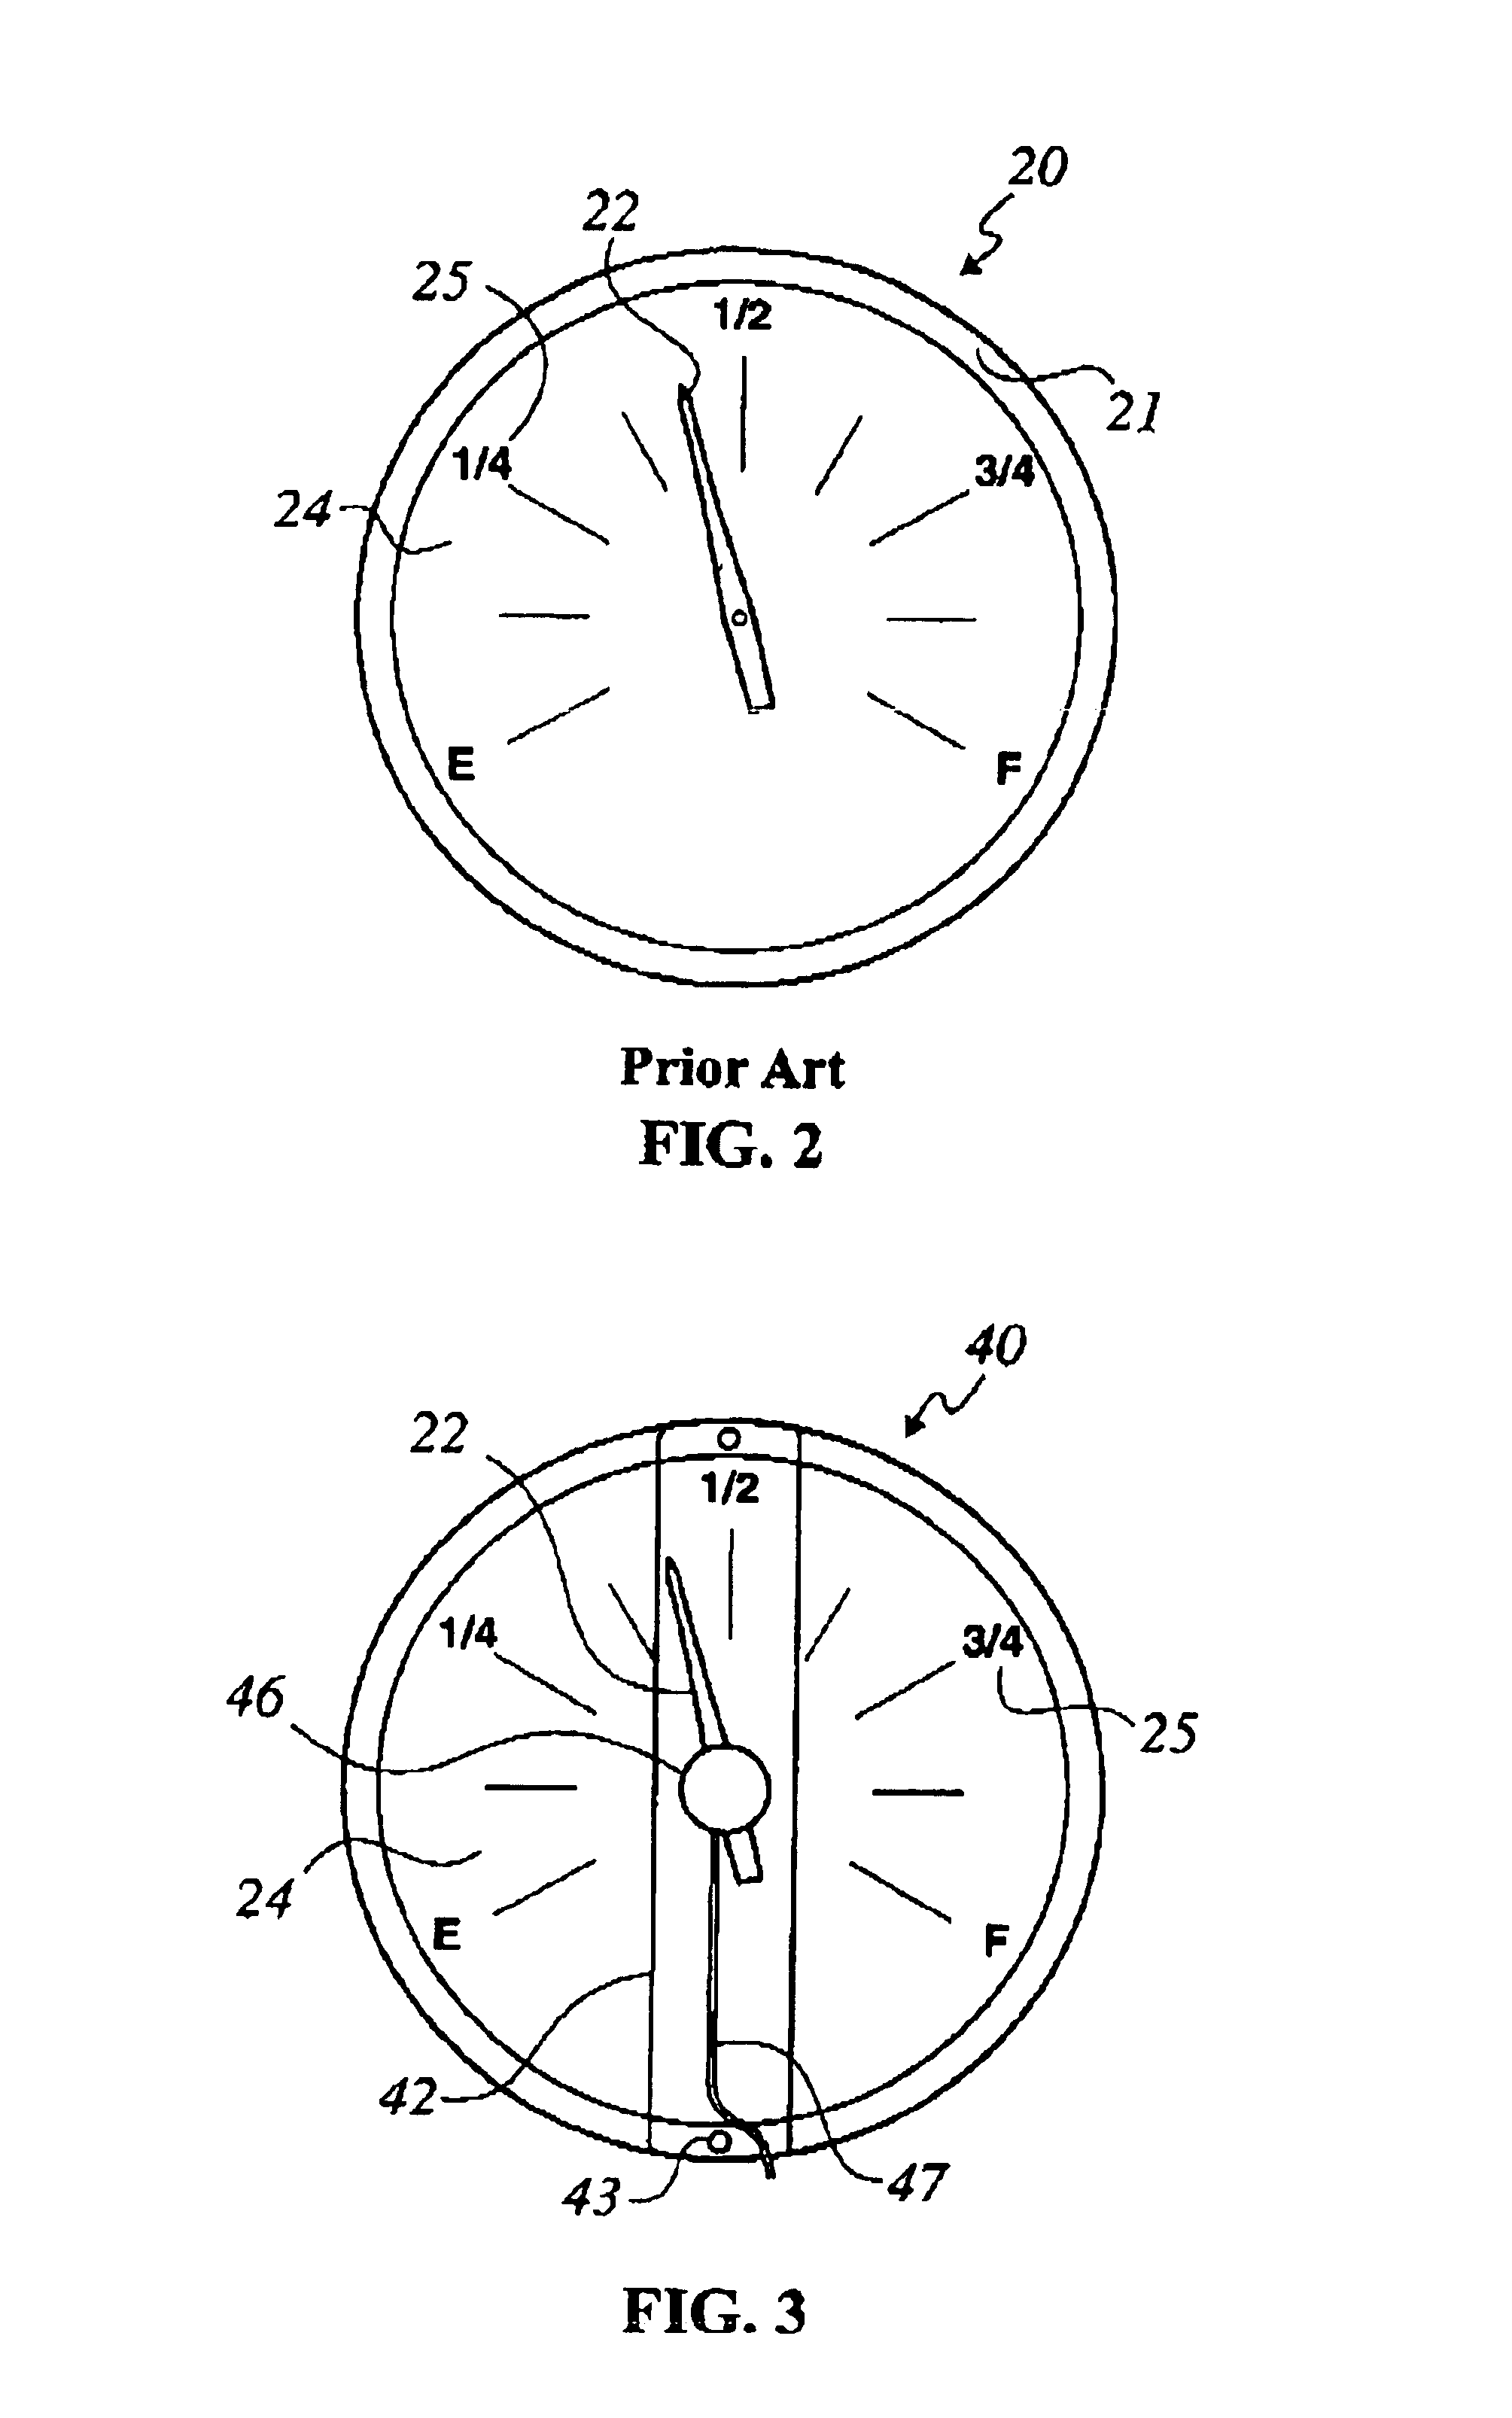 Method for upgrading a dial indicator to provide remote indication capability